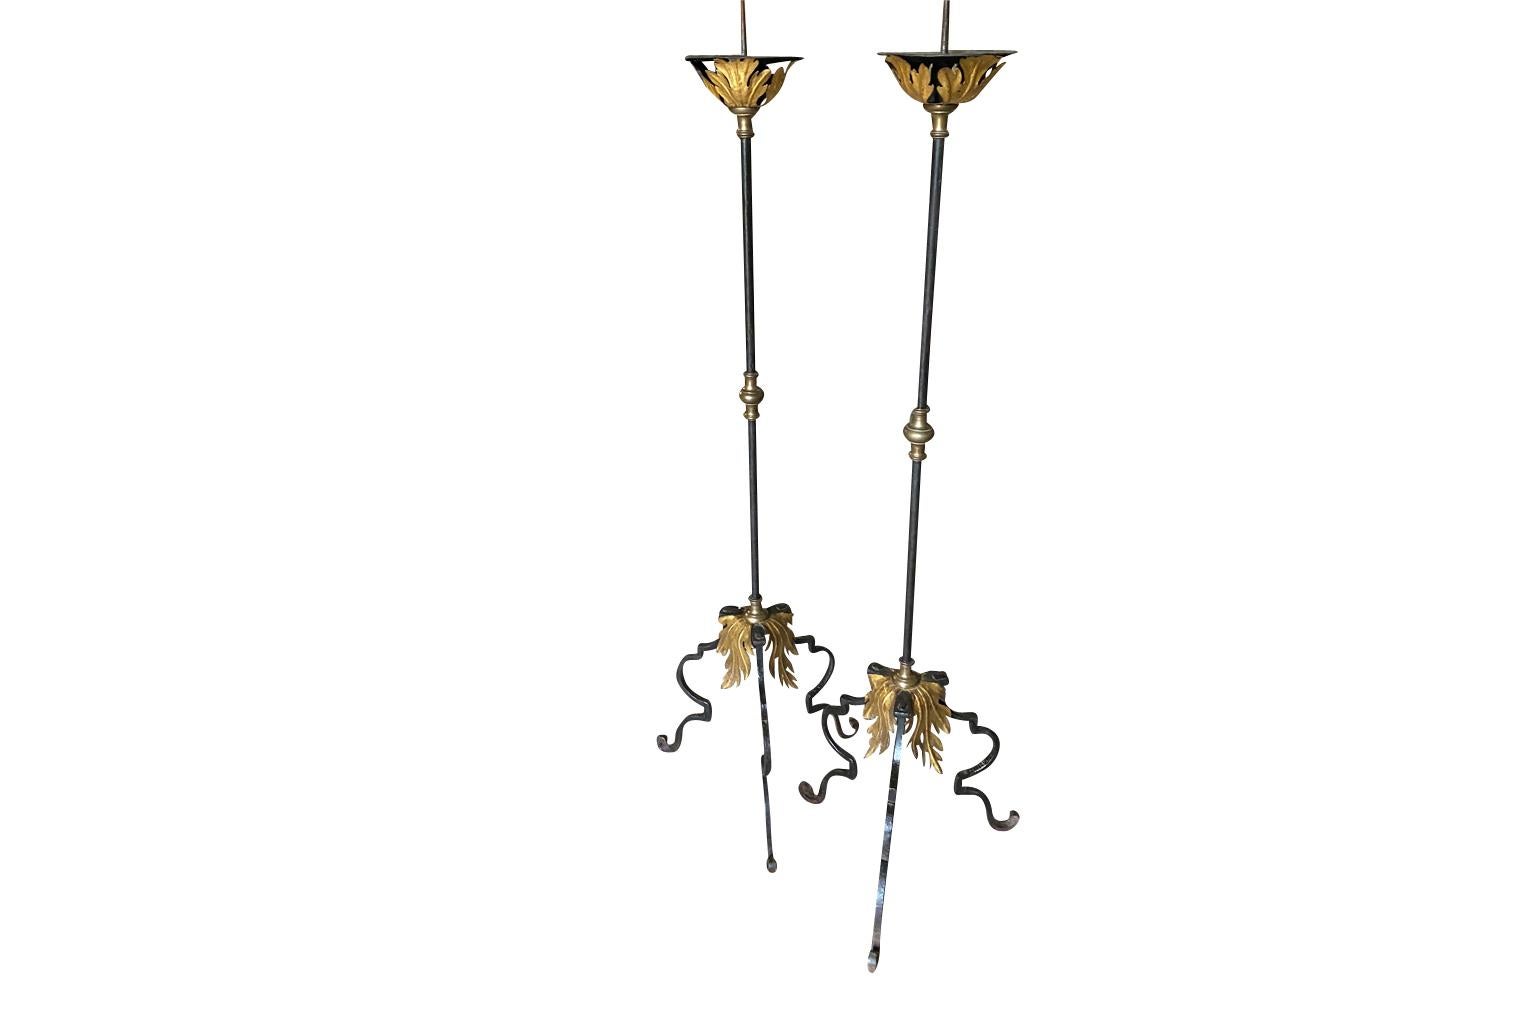 An outstanding 18th century pair of Pique Cierge from the Veneto region of Italy.  Masterly crafted from hand forged iron with gilt accents.  A very elegant accent for a lovely surrounding.